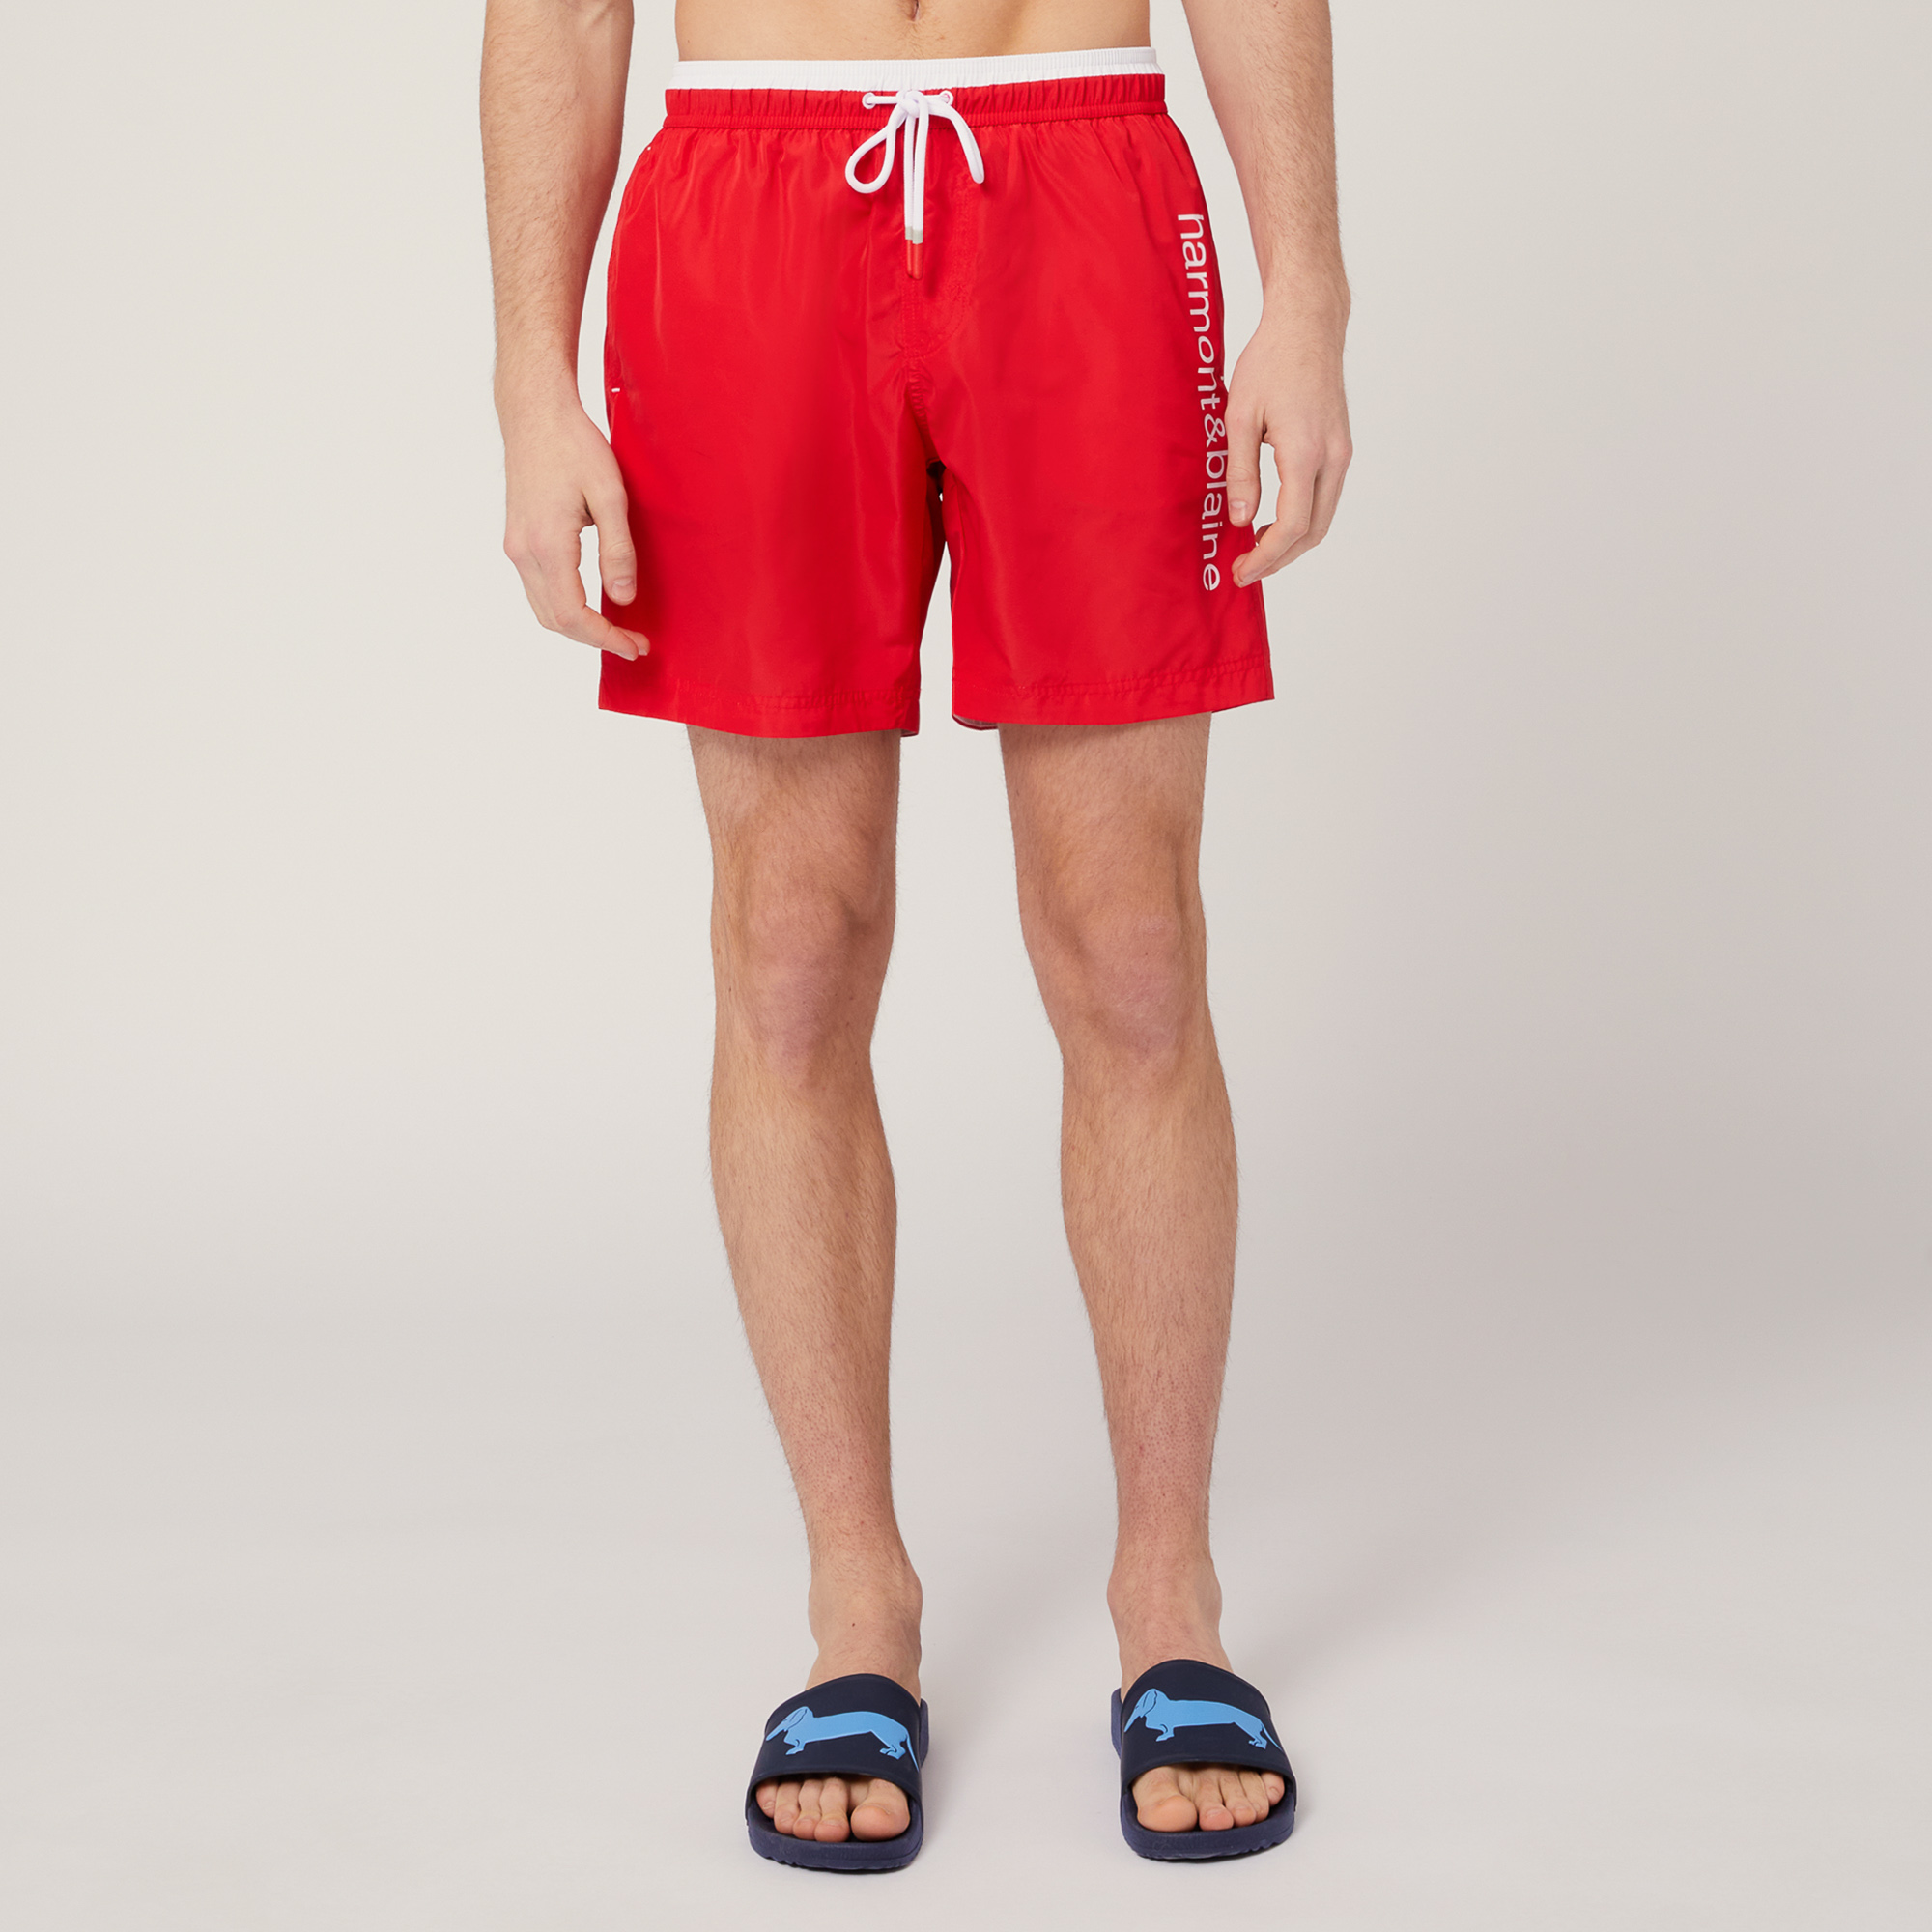 Swim Trunks with Lettering, Red, large